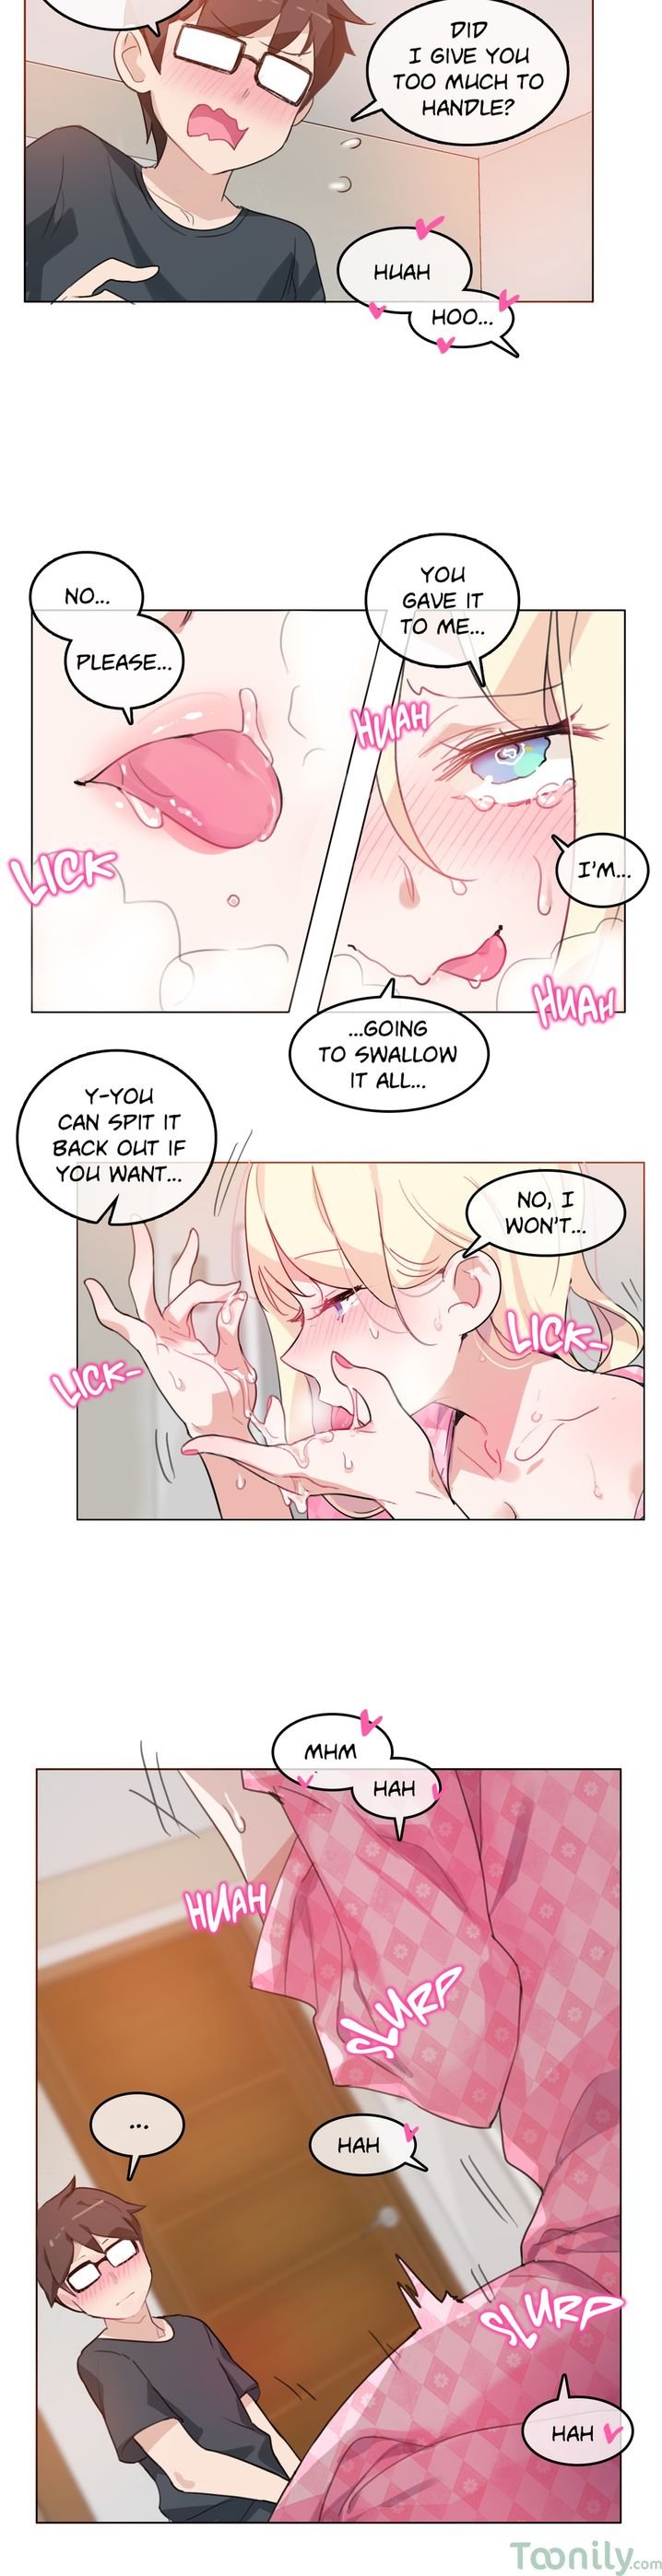 a-perverts-daily-life-chap-15-1